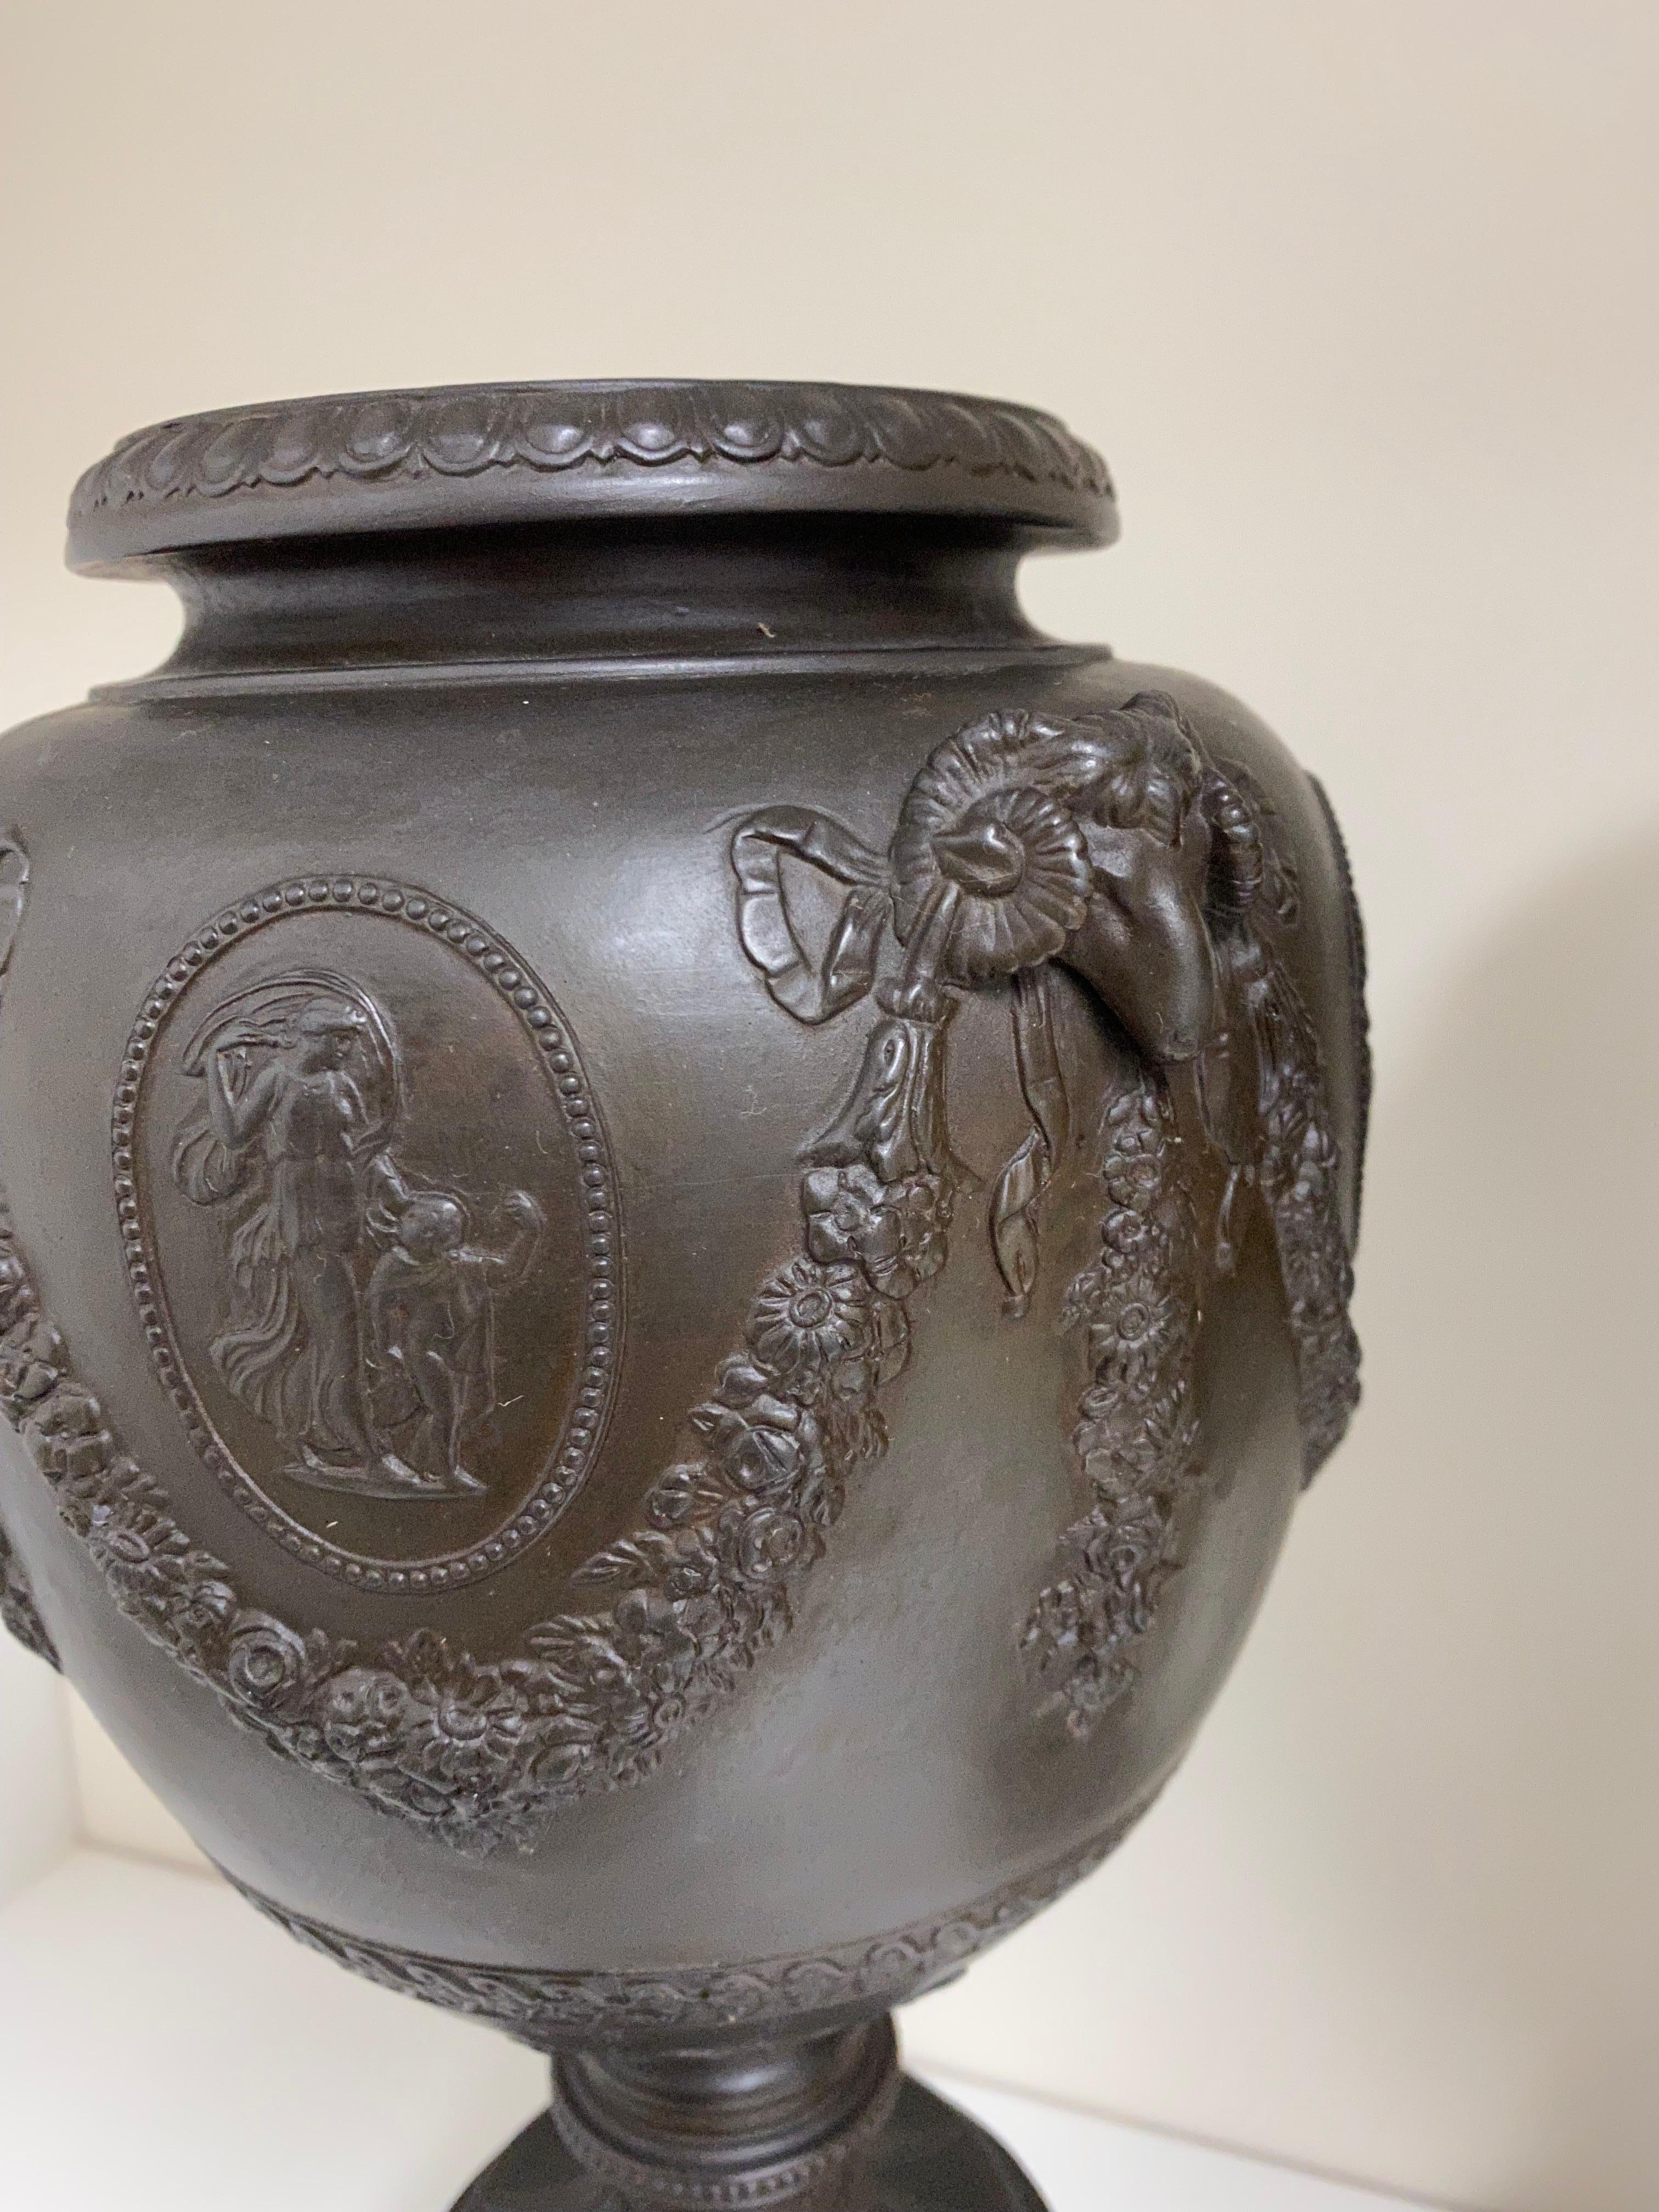 Pair of Ceramic Basalt Relief Urns Attributed to Wedgwood In Good Condition For Sale In Stockton, NJ